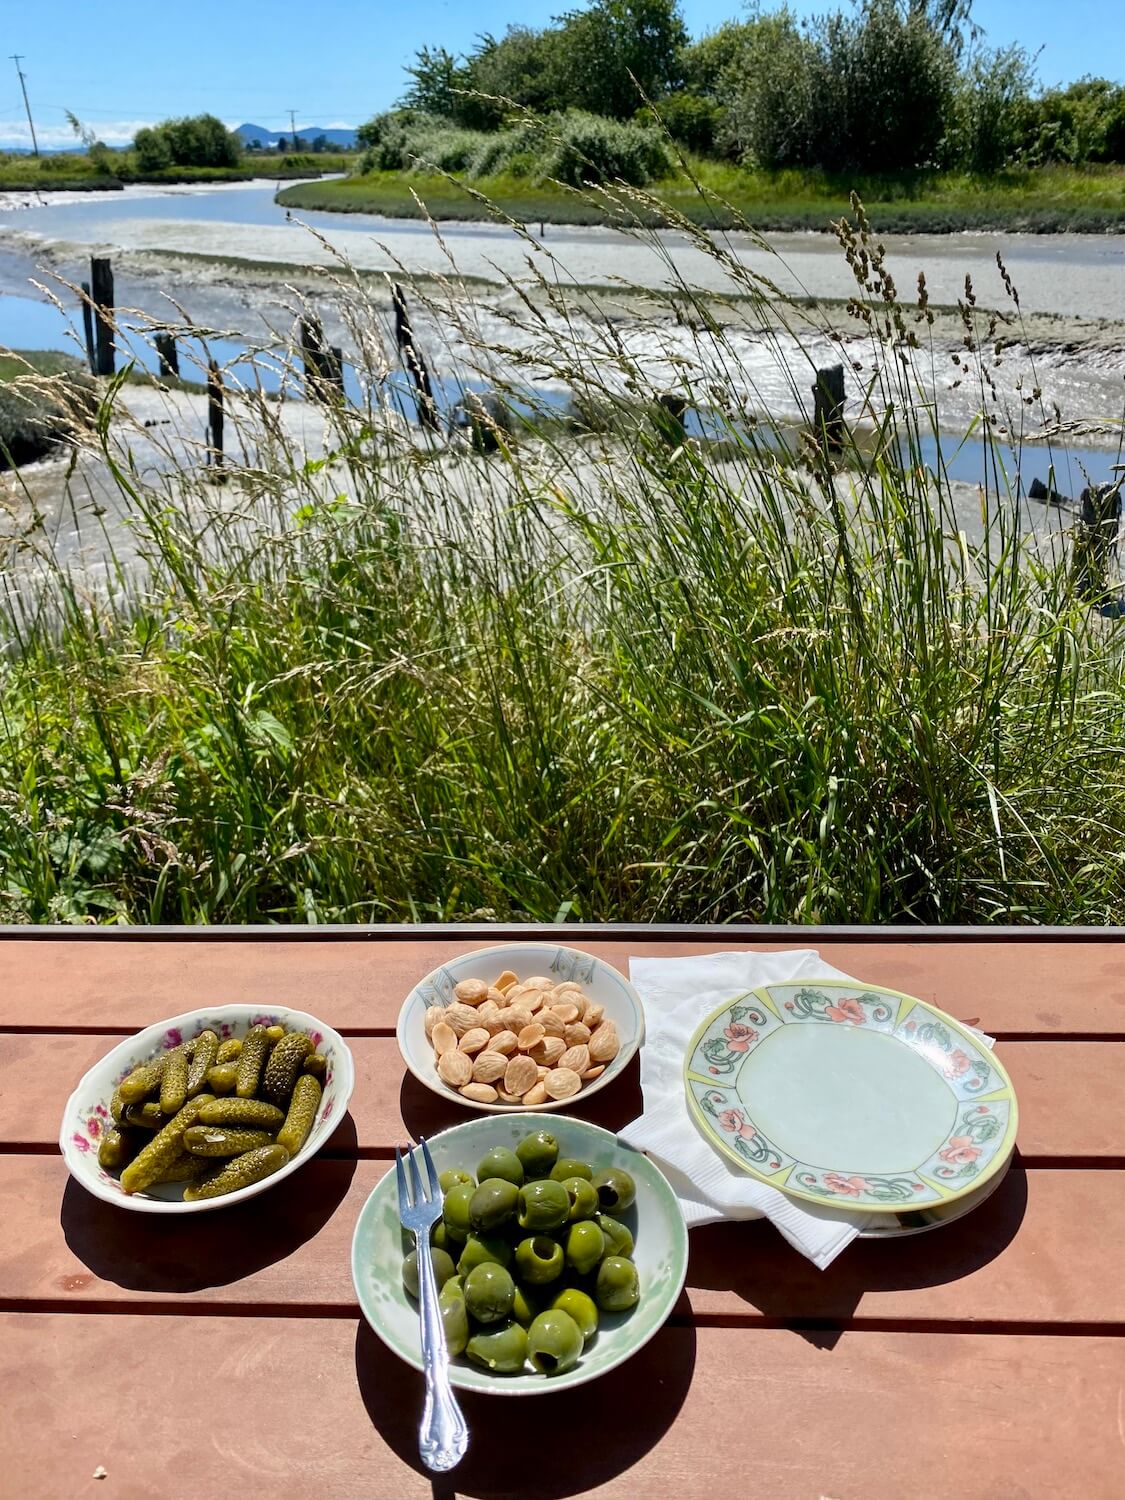 Small plates of snacks are on a picnic table overlooking a grassy bank leading to a tidal slough in Edison Washington. This makes a great stop on the Seattle to Vancouver drive.